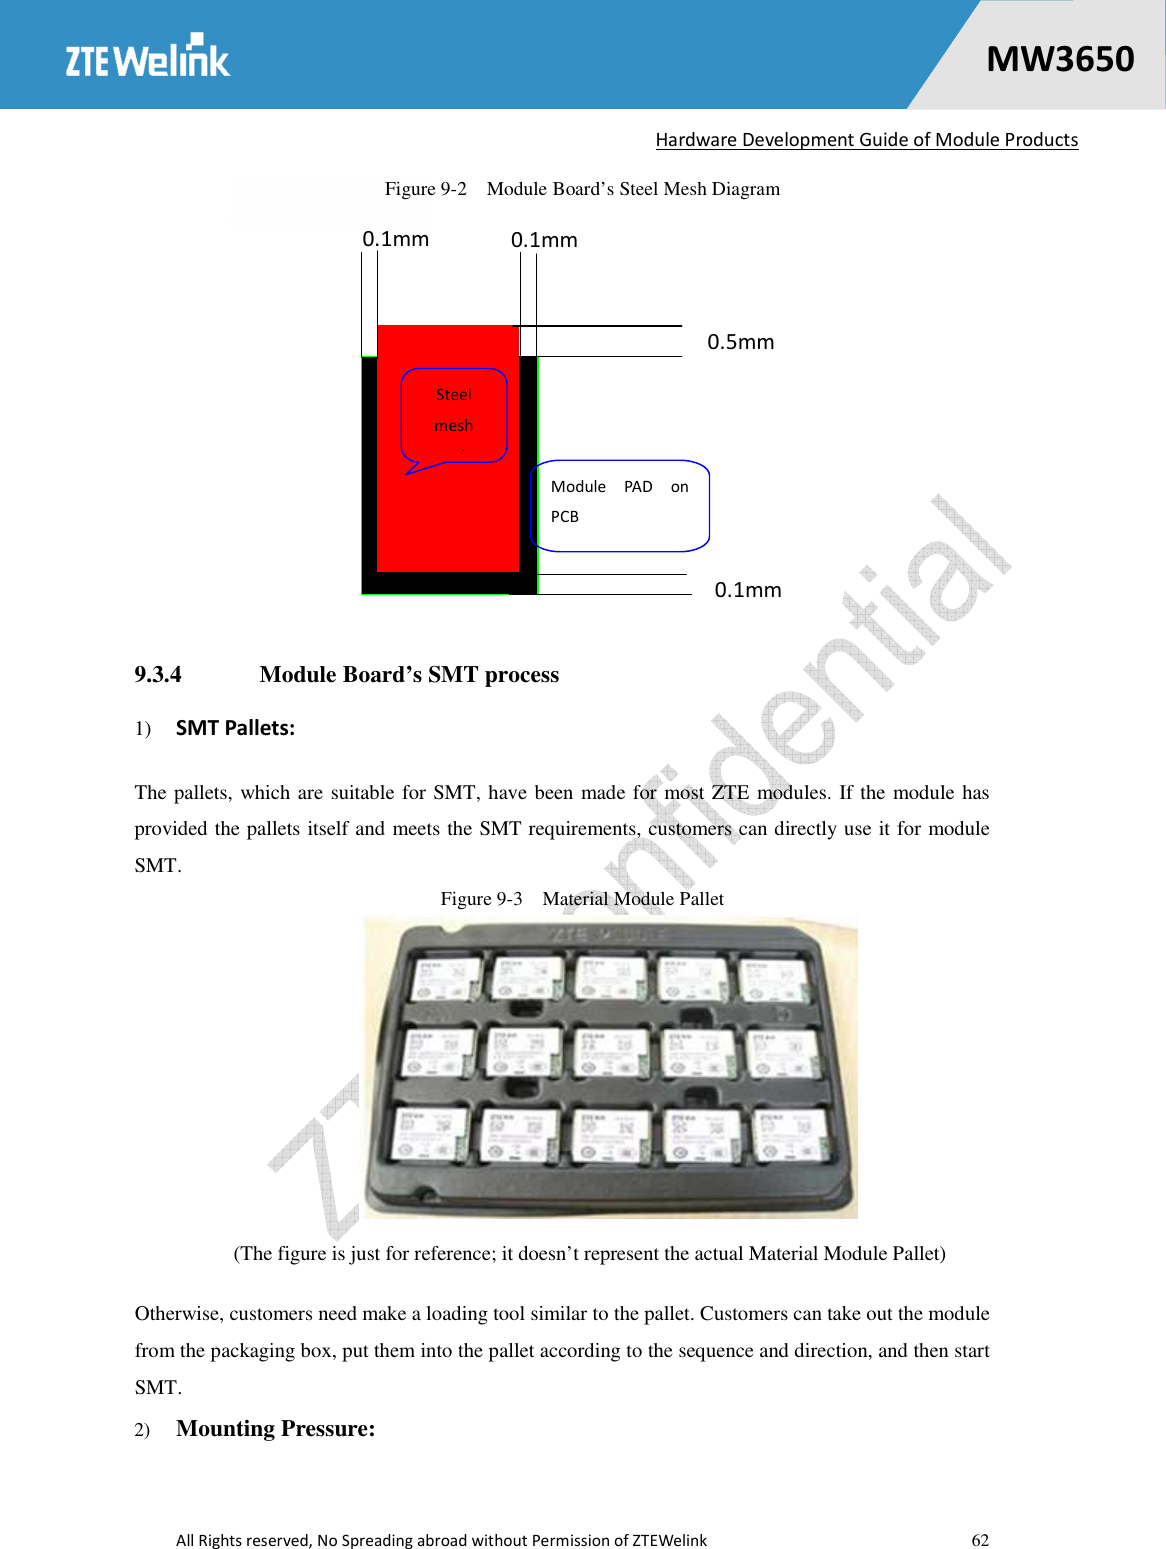   Hardware Development Guide of Module Products  All Rights reserved, No Spreading abroad without Permission of ZTEWelink    62    MW36500 Figure 9-2    Module Board’s Steel Mesh Diagram 9.3.4  Module Board’s SMT process 1) SMT Pallets: The pallets, which are suitable for SMT, have been made for most ZTE modules. If the module has provided the pallets itself and meets the SMT requirements, customers can directly use it for module SMT. Figure 9-3    Material Module Pallet    (The figure is just for reference; it doesn’t represent the actual Material Module Pallet) Otherwise, customers need make a loading tool similar to the pallet. Customers can take out the module from the packaging box, put them into the pallet according to the sequence and direction, and then start SMT. 2) Mounting Pressure: 0.1mm  0.1mm 0.5mm 0.1mm Steel mesh opening Module  PAD  on PCB 